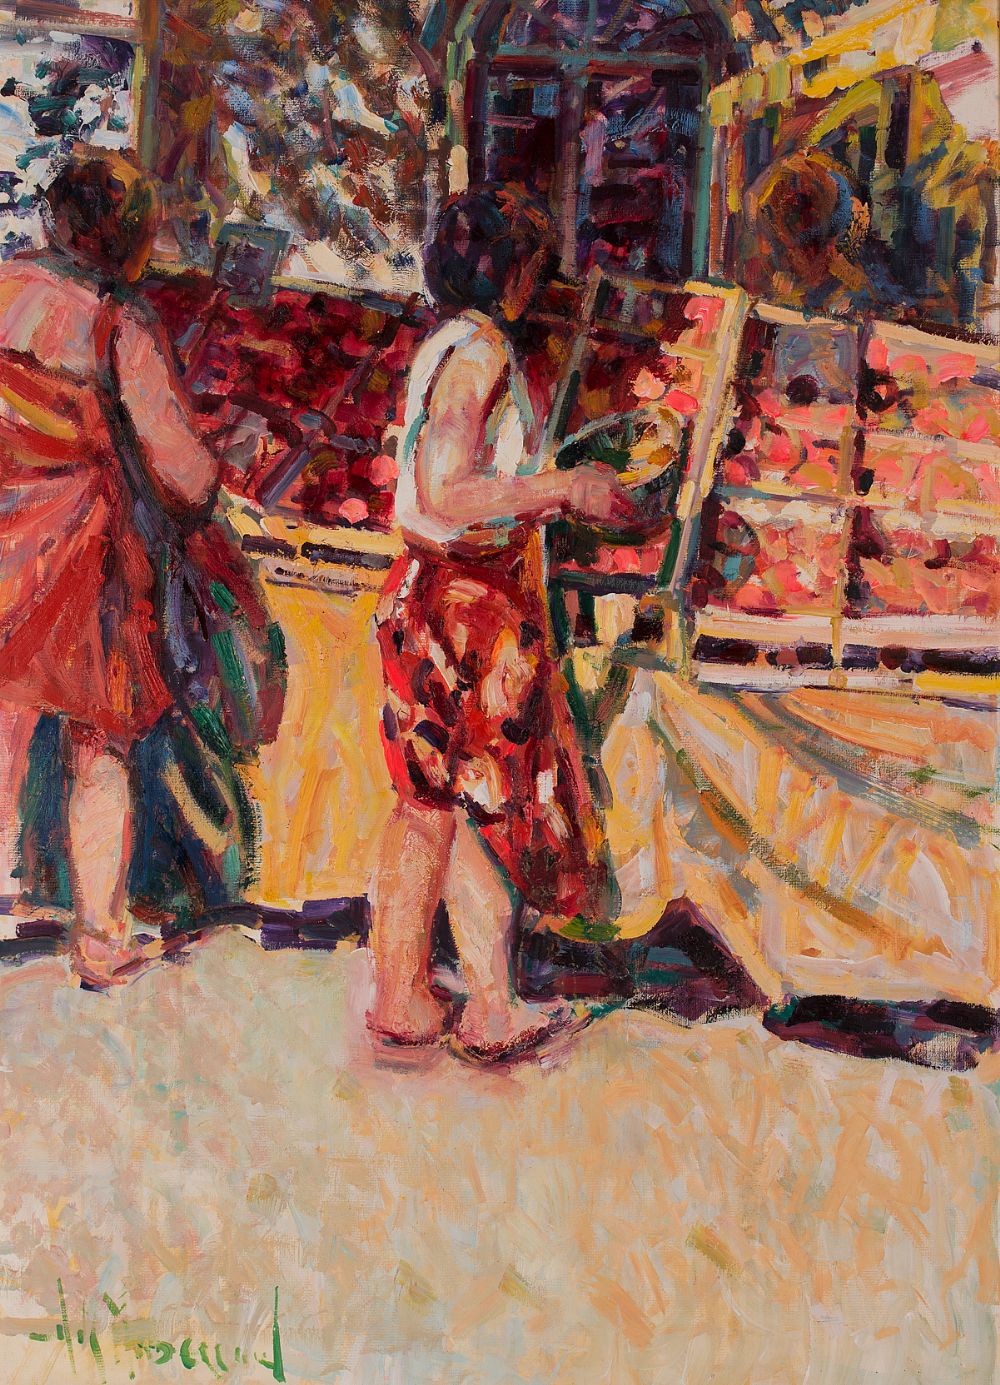 Lot 10 - THE FRIDAY MARKET by Arthur K Maderson, b.1942